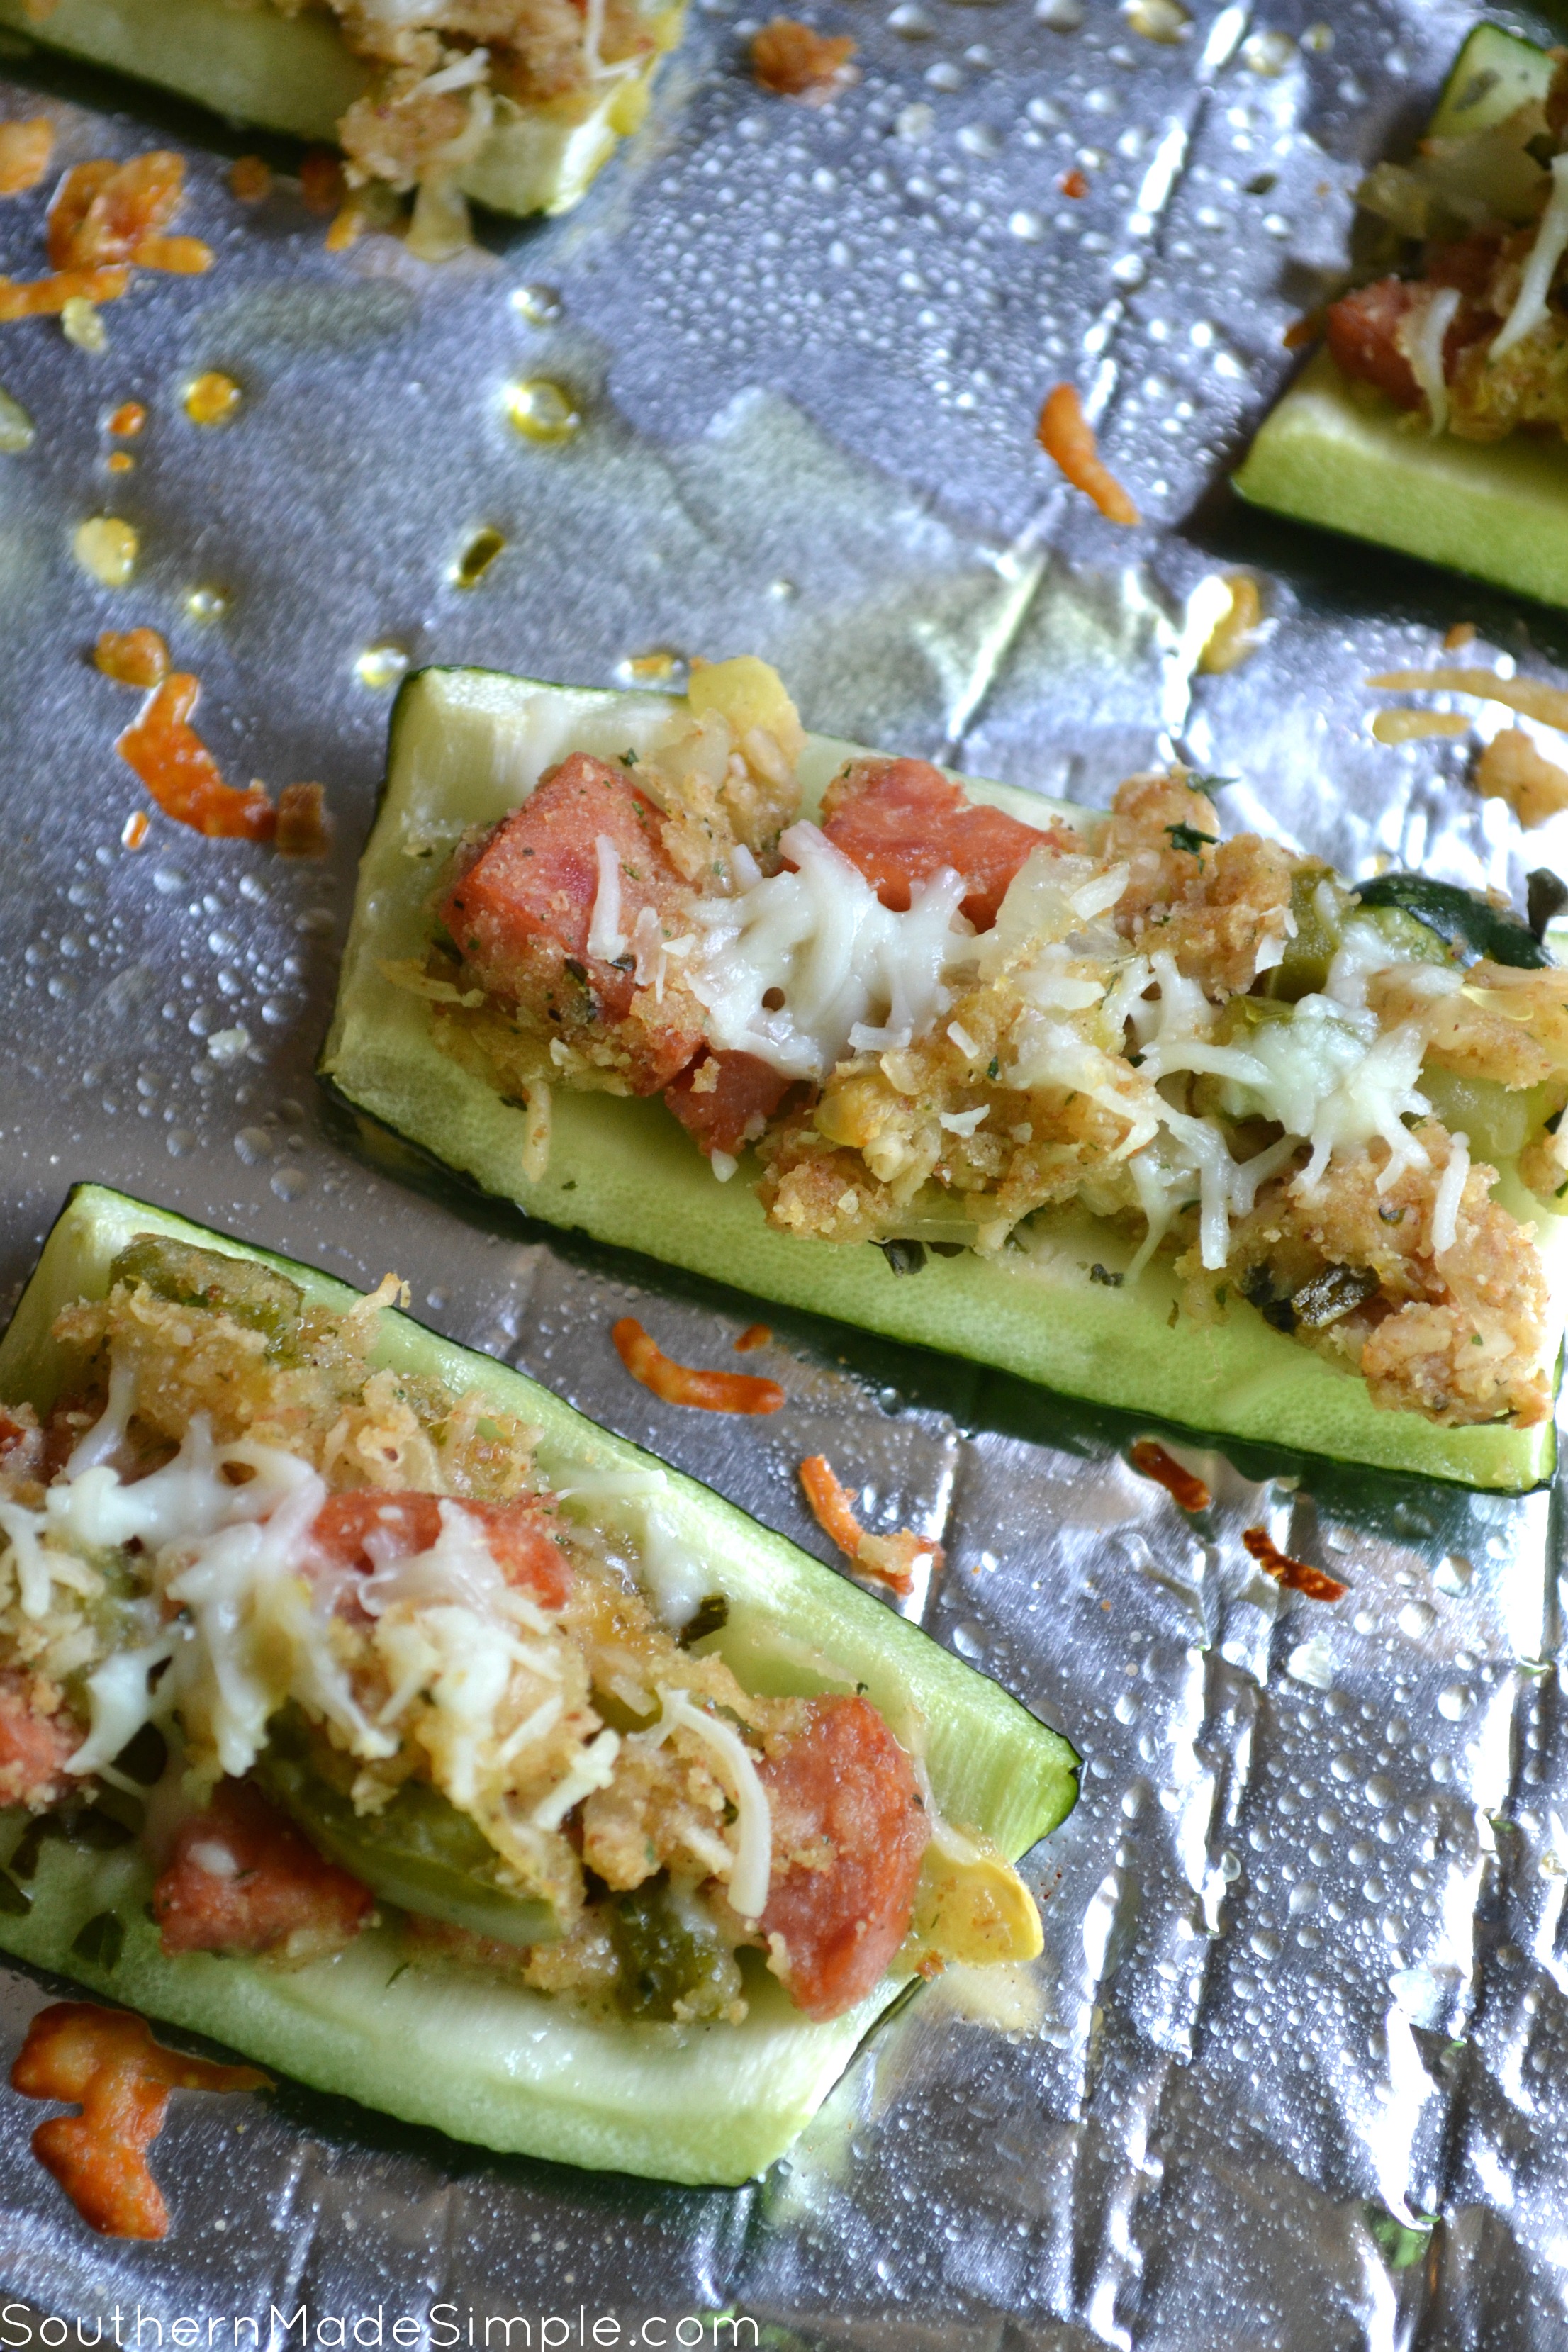 Looking for something new to do with Zucchini? These Cheesy Italian Zucchini Boats are a MUST make!